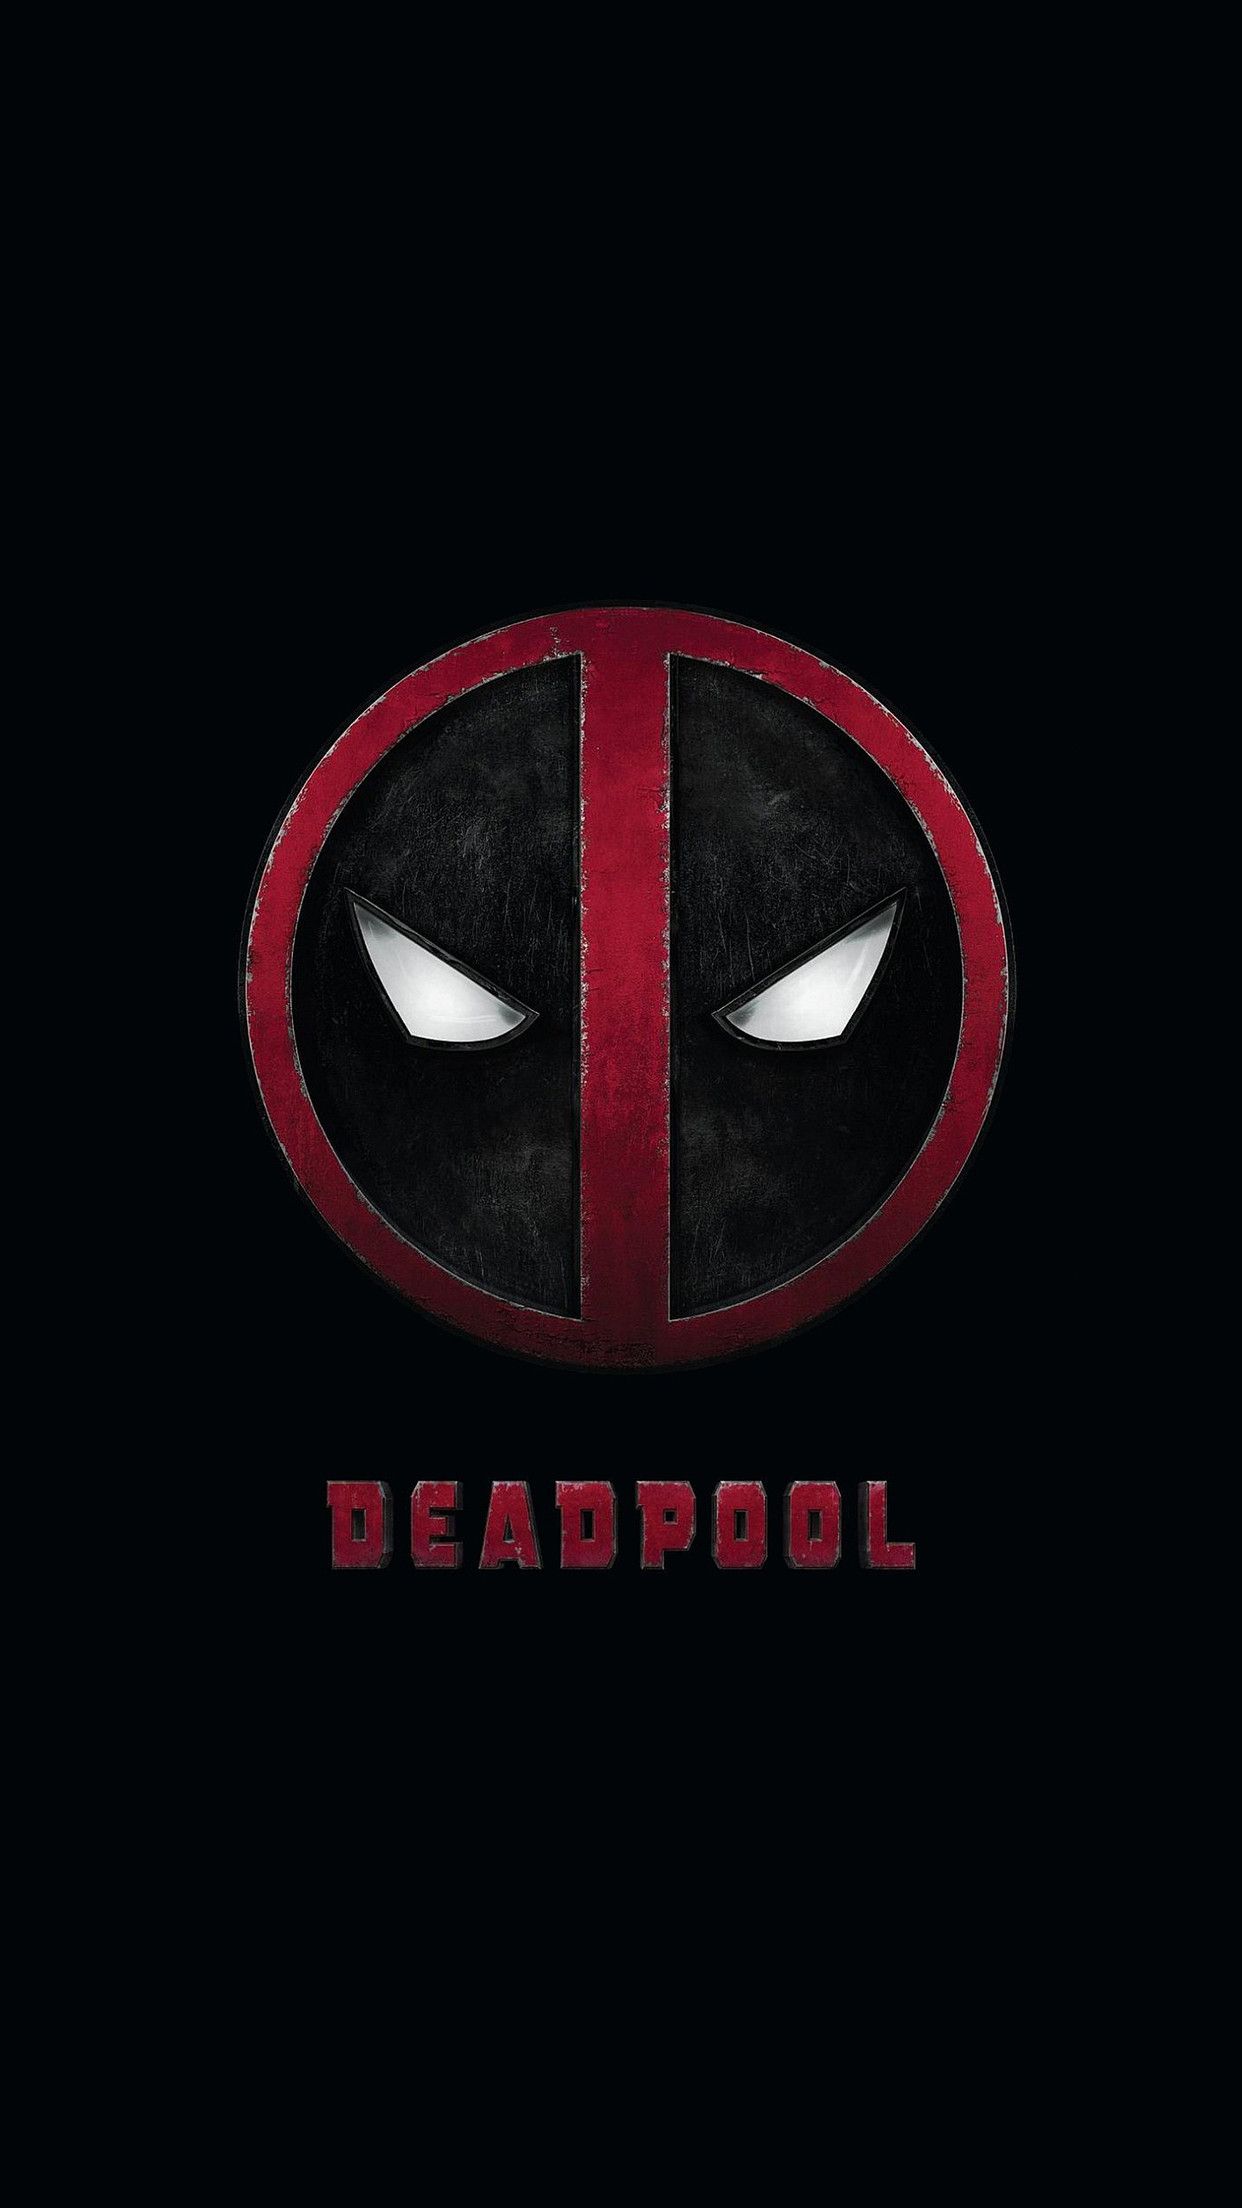 Image for Deadpool iPhone Wallpaper For Android y92